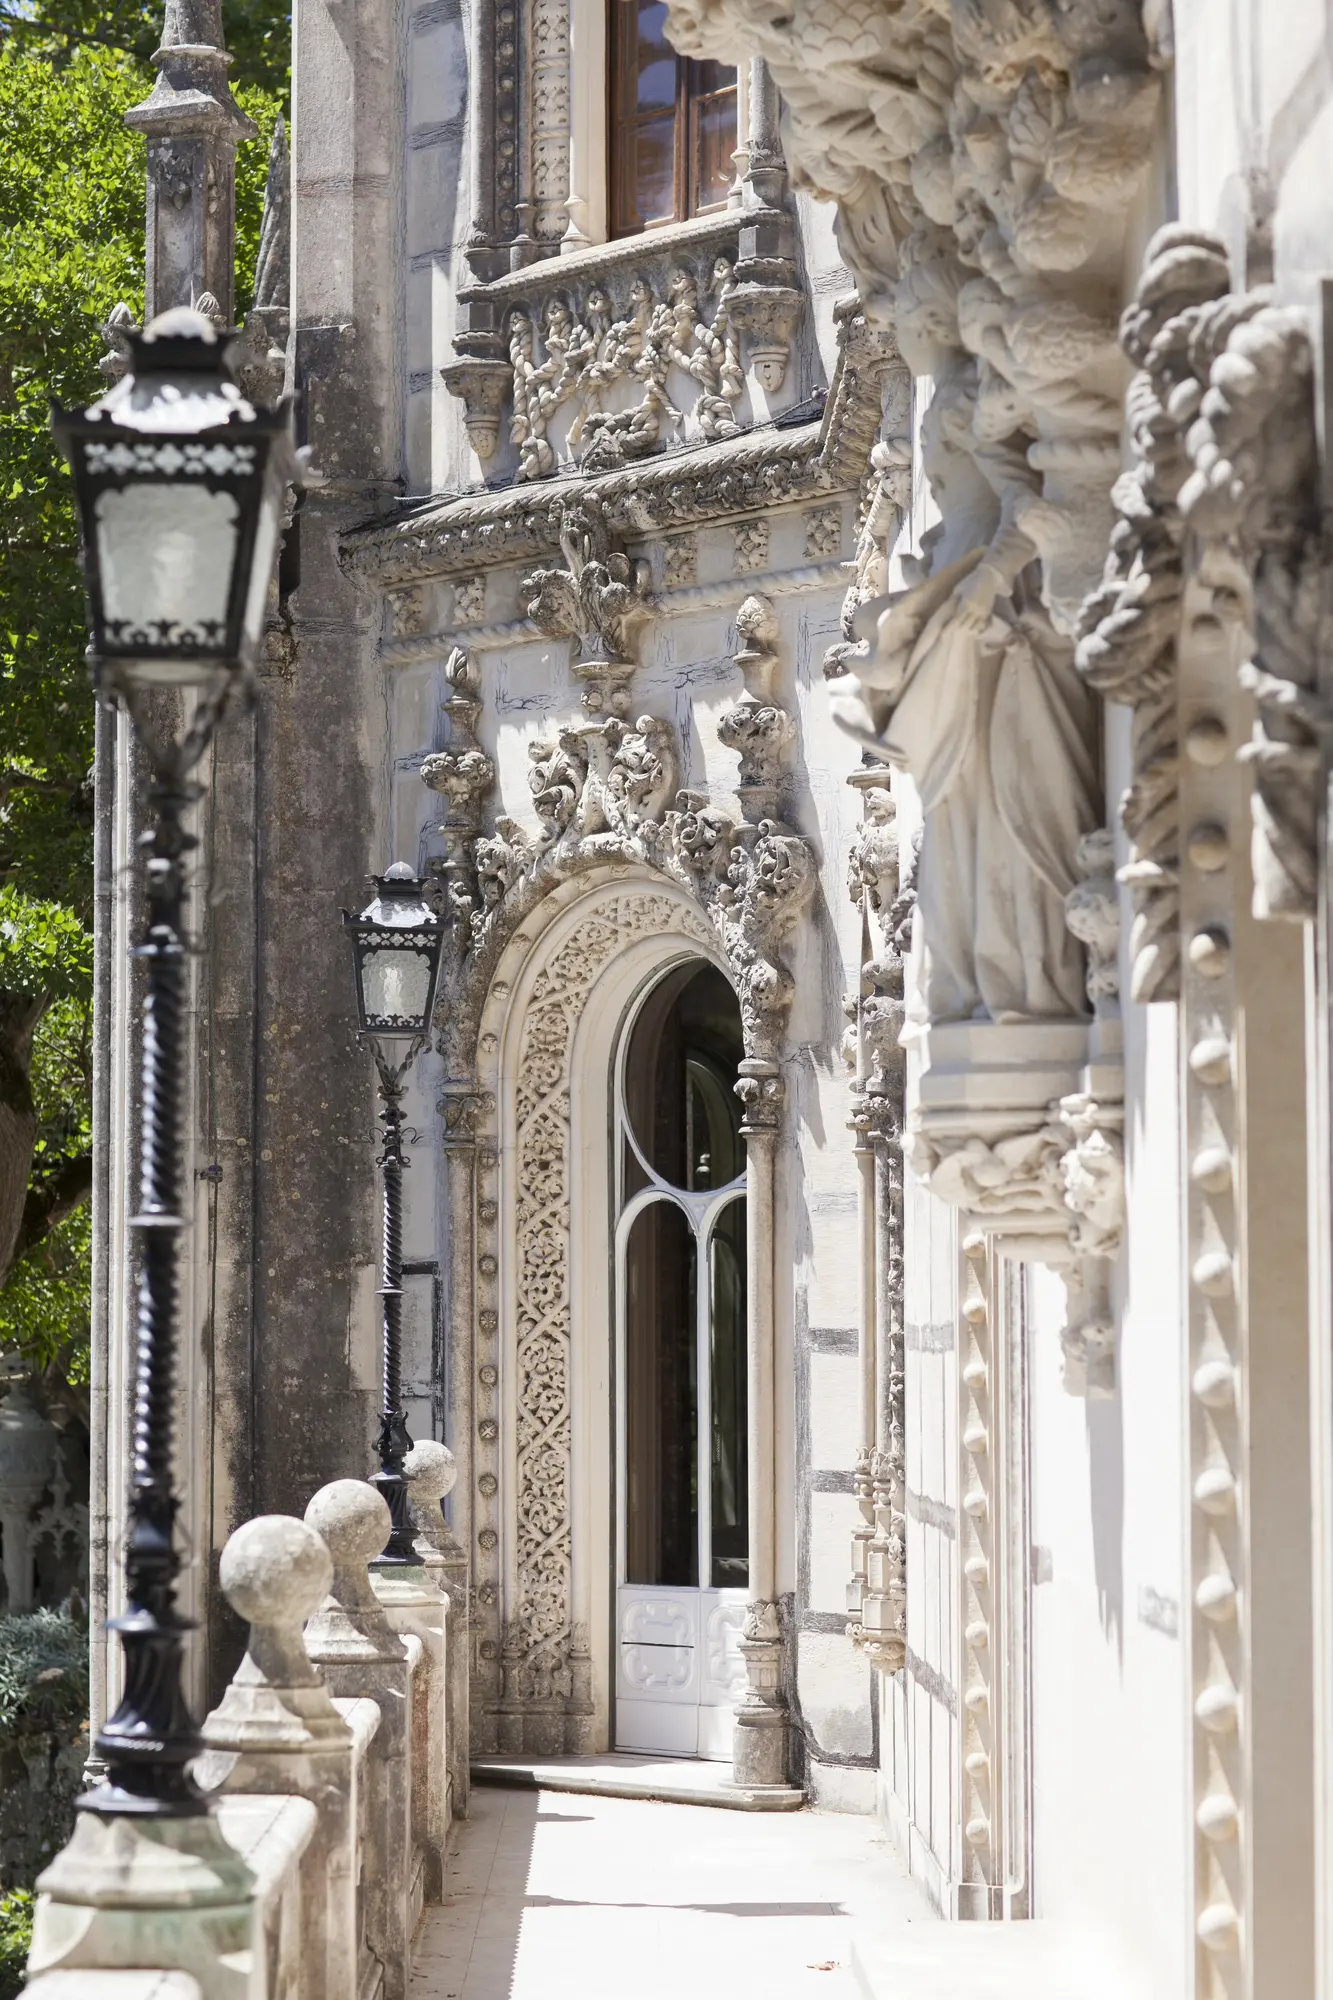 Close up of ornate white and grey stone balcony and rod iron street lamp at Quinta da Regaleira palace in Sintra Portugal.